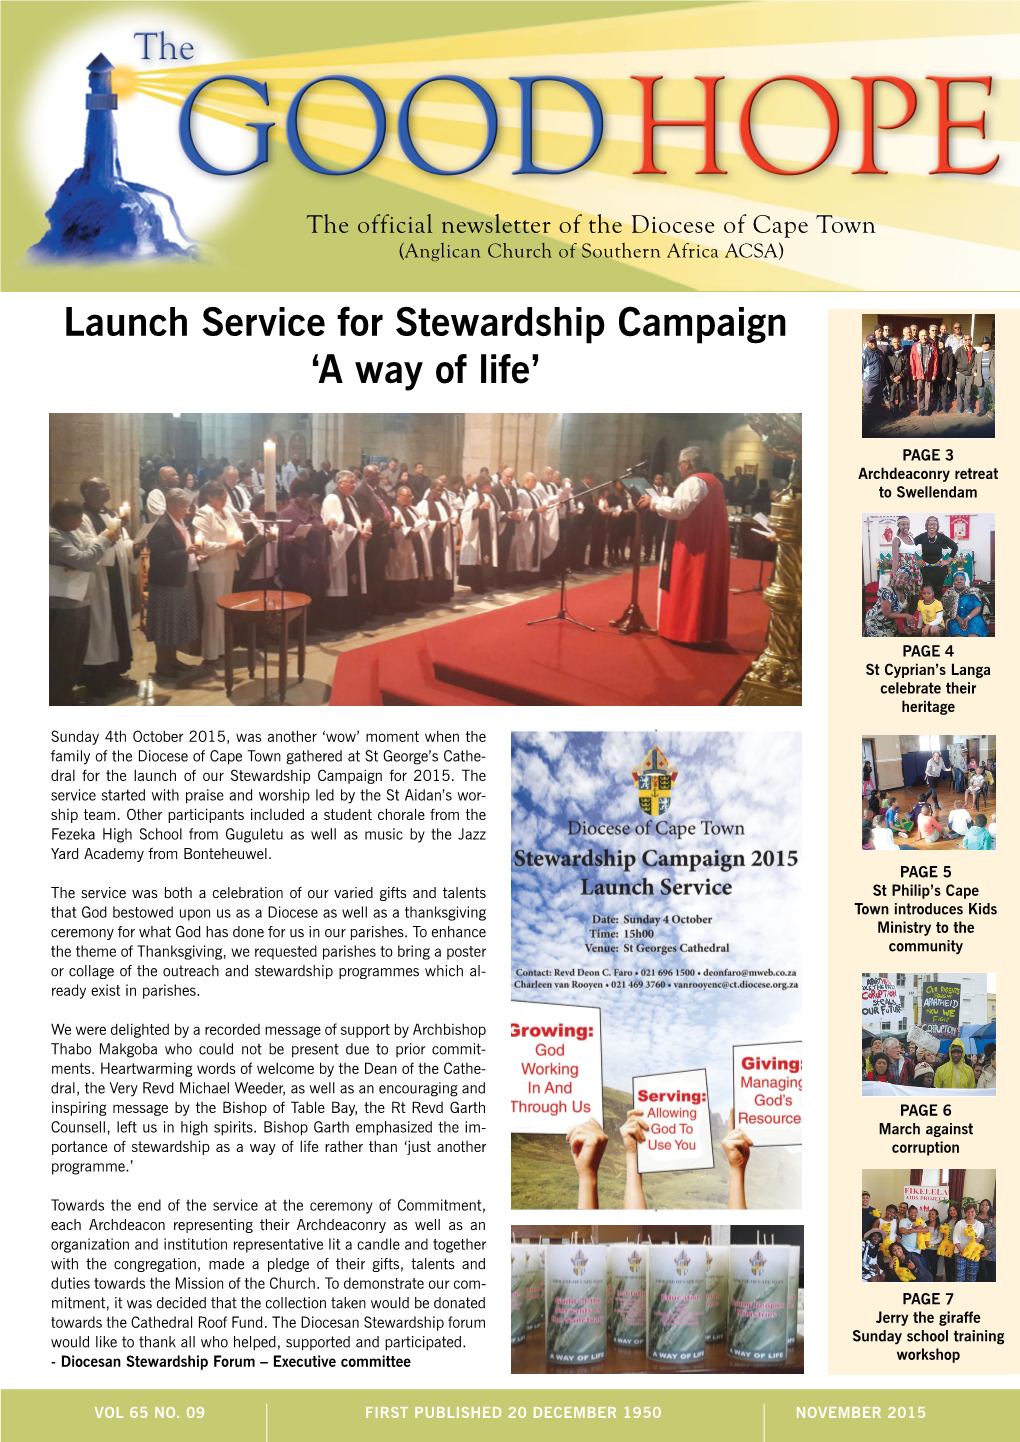 Launch Service for Stewardship Campaign 'A Way of Life'